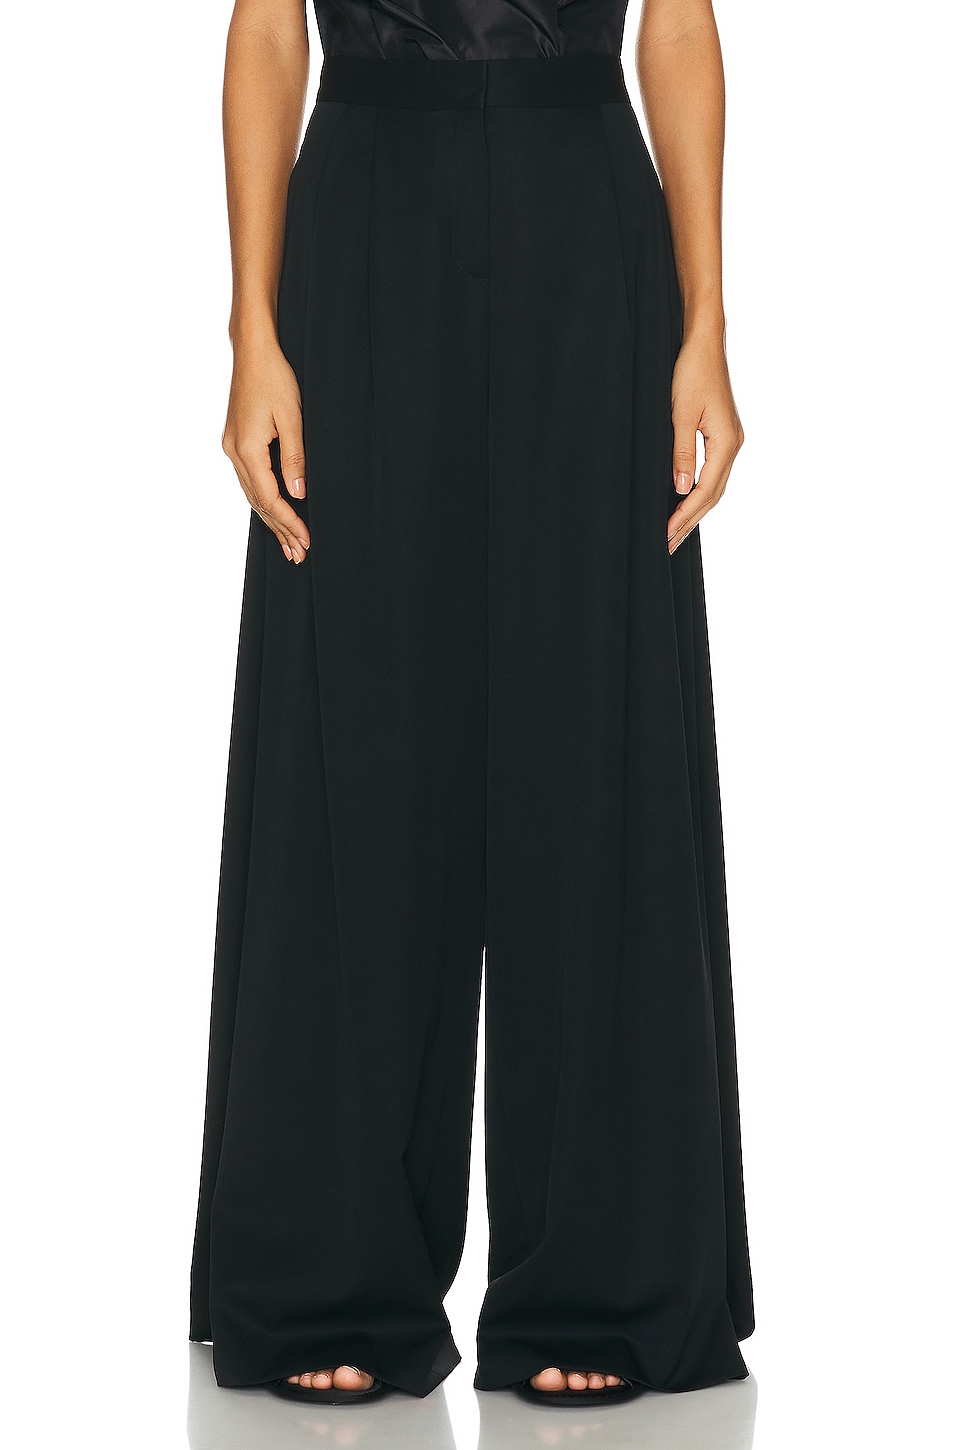 Image 1 of The Row Paras Pant in Black